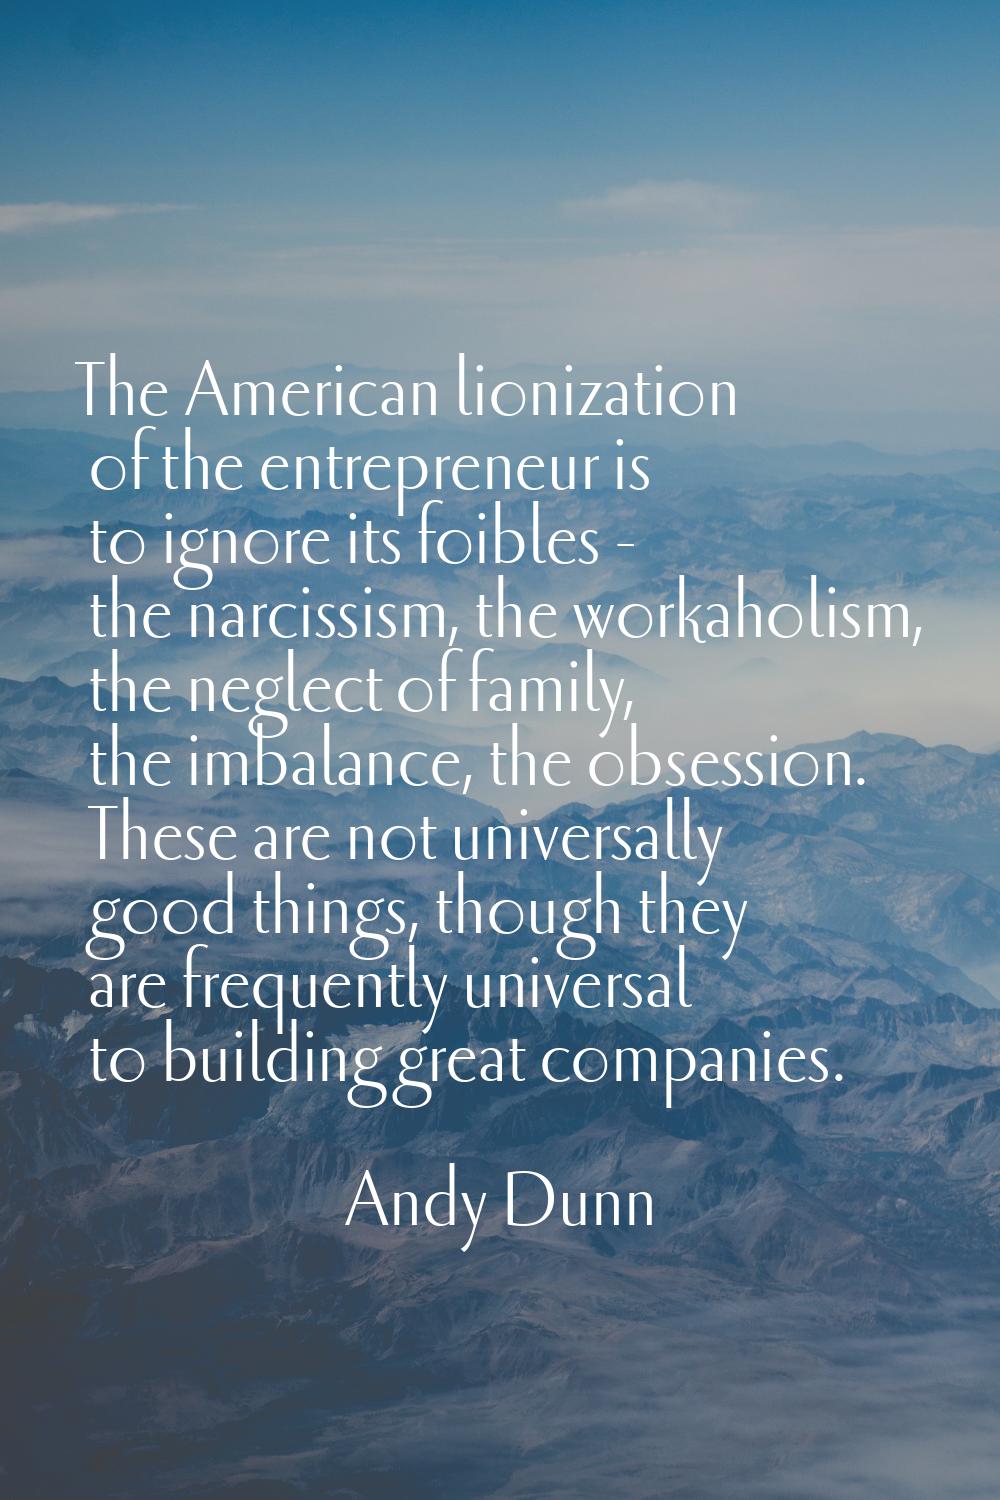 The American lionization of the entrepreneur is to ignore its foibles - the narcissism, the workaho